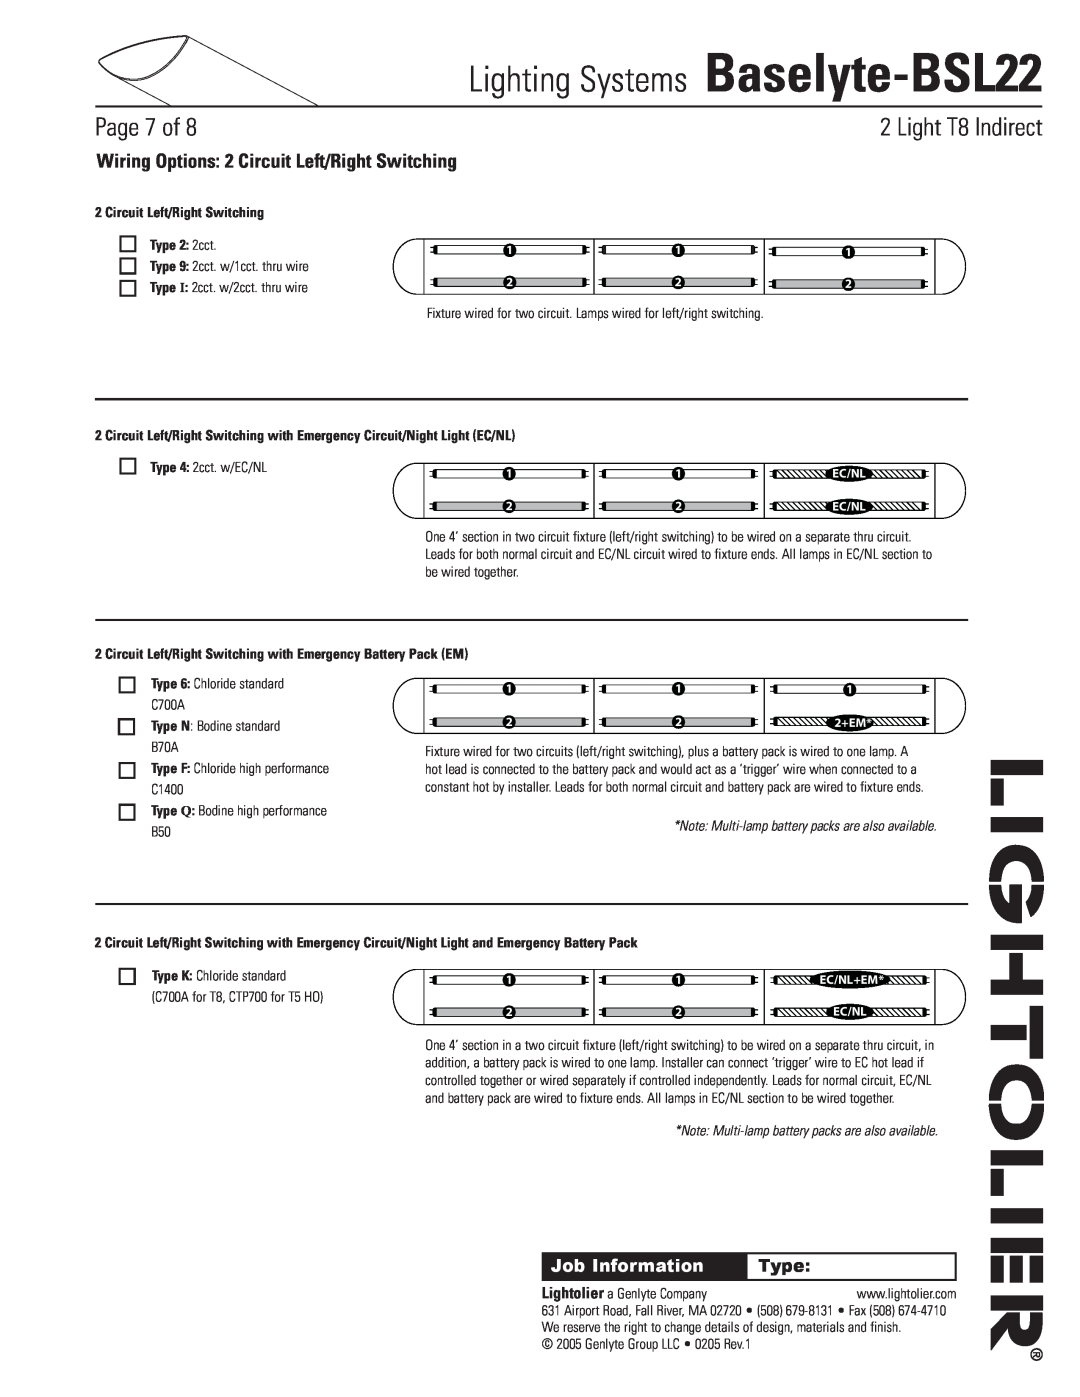 Lightolier Baselyte-BSL22 Wiring Options 2 Circuit Left/Right Switching, Circuit Left/Right Switching Type 2 2cct, Page of 